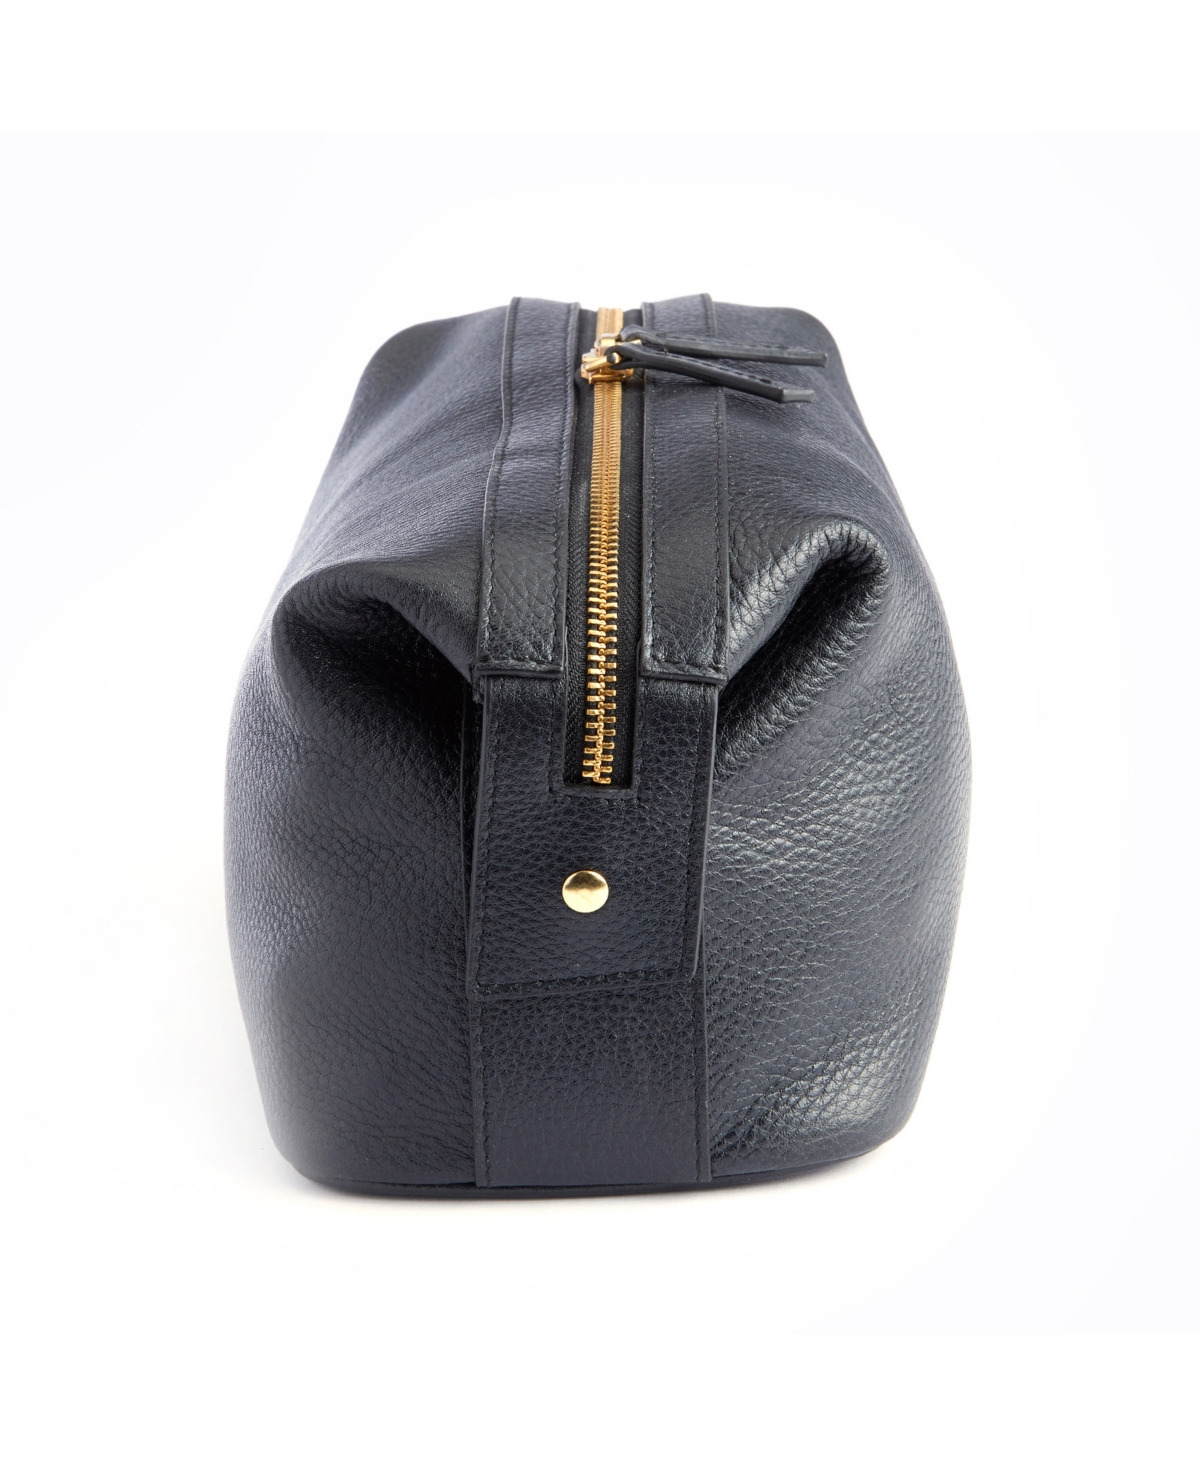 Pebbled Leather Toiletry Bag - Black